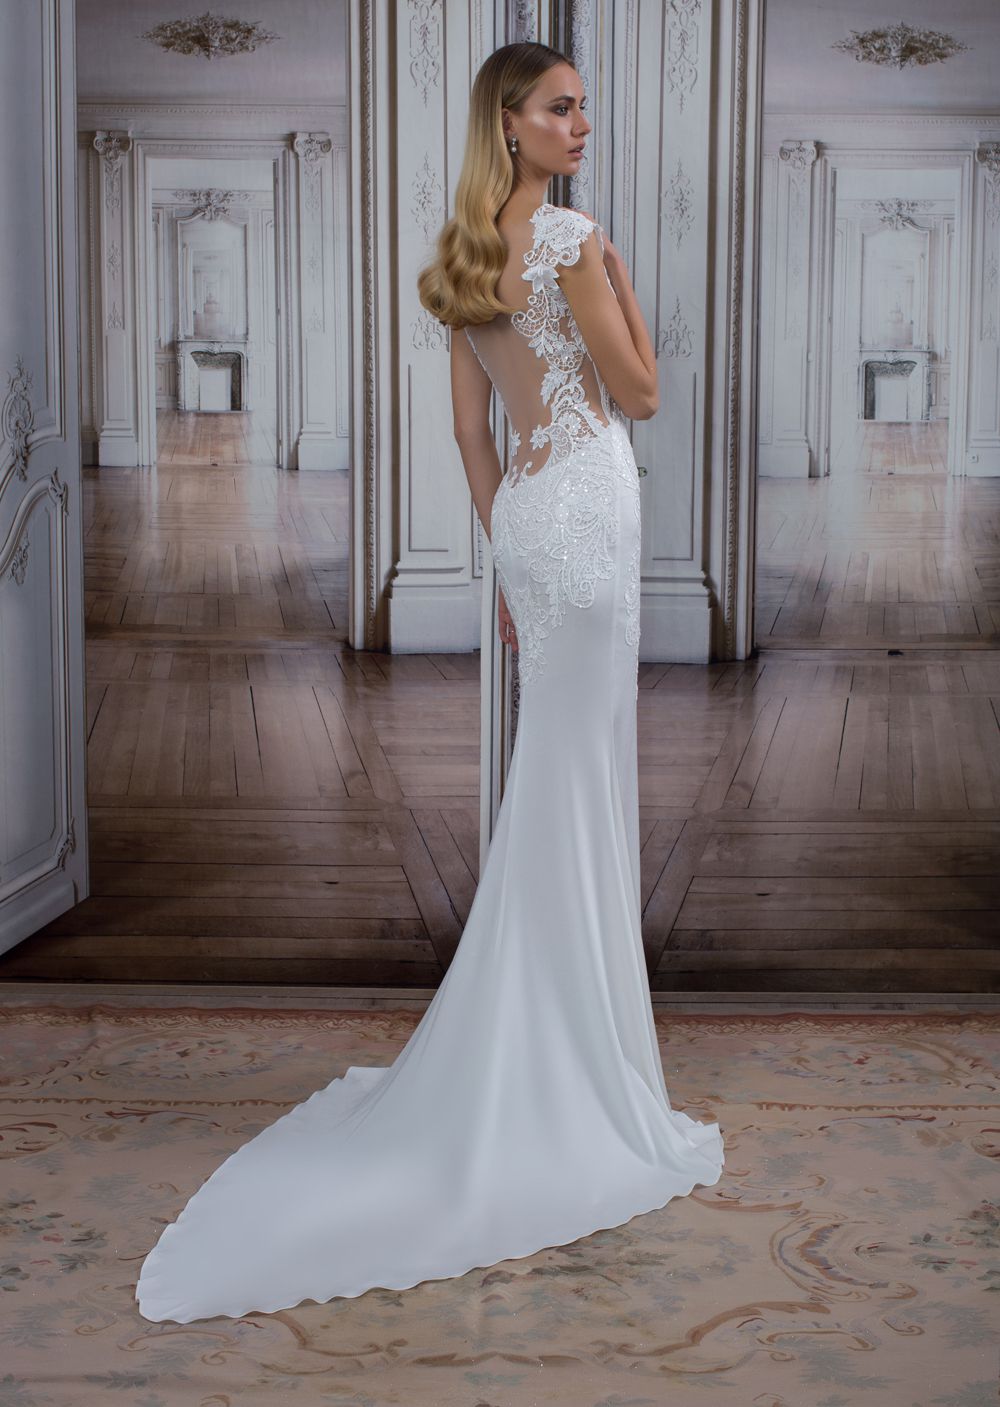 A model wearing a detailed wedding gown with a lace back